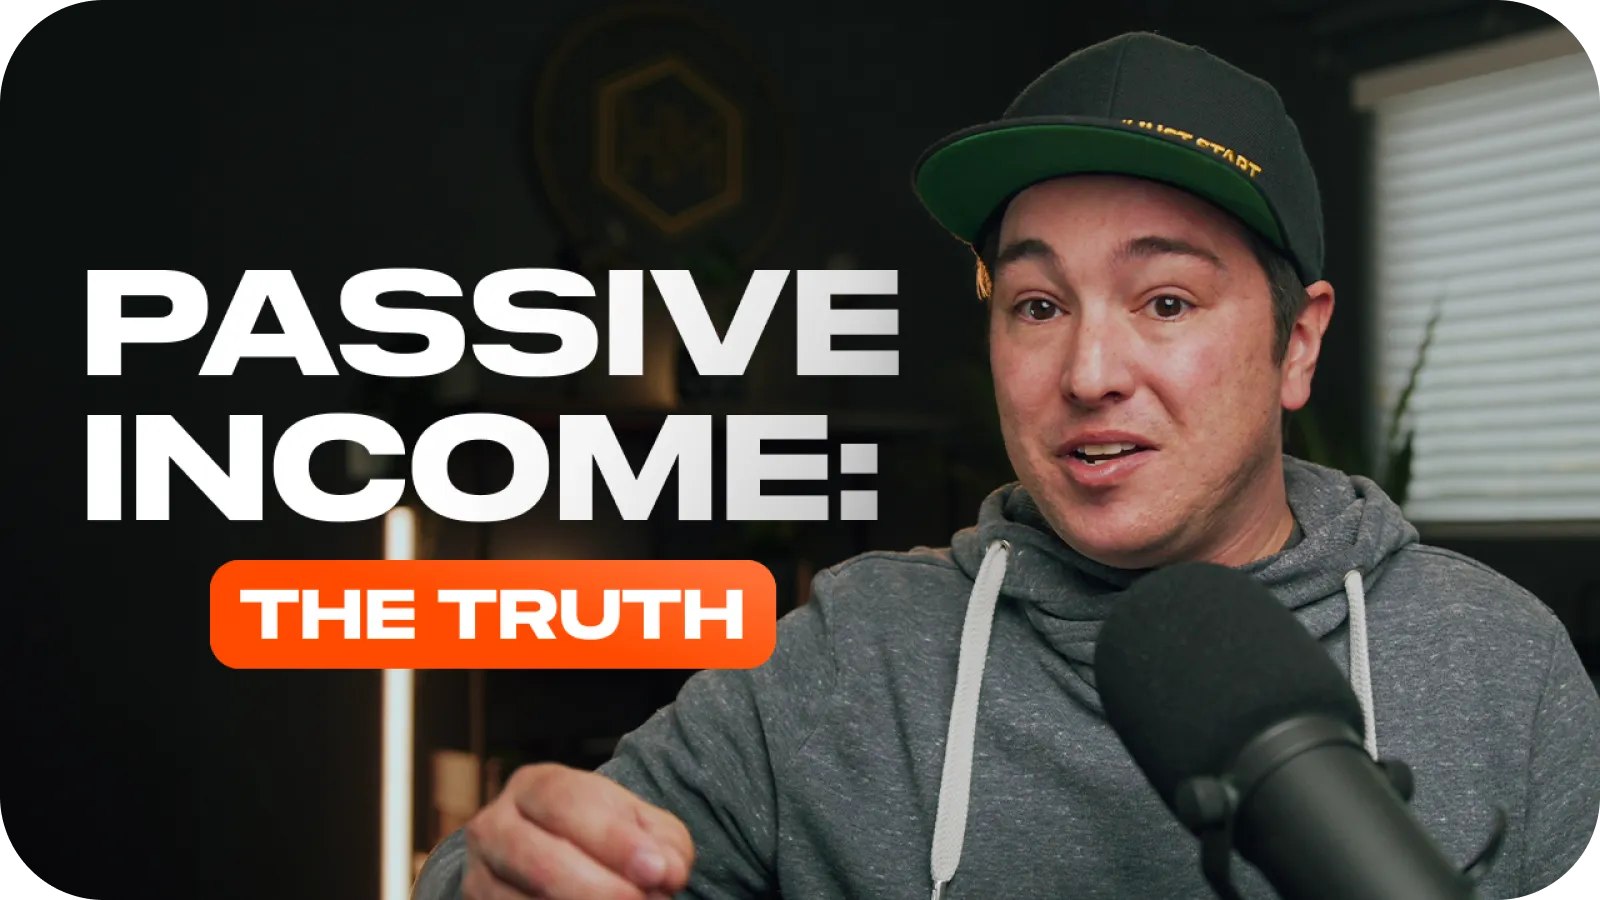 Passive income - the truth video thumbnail